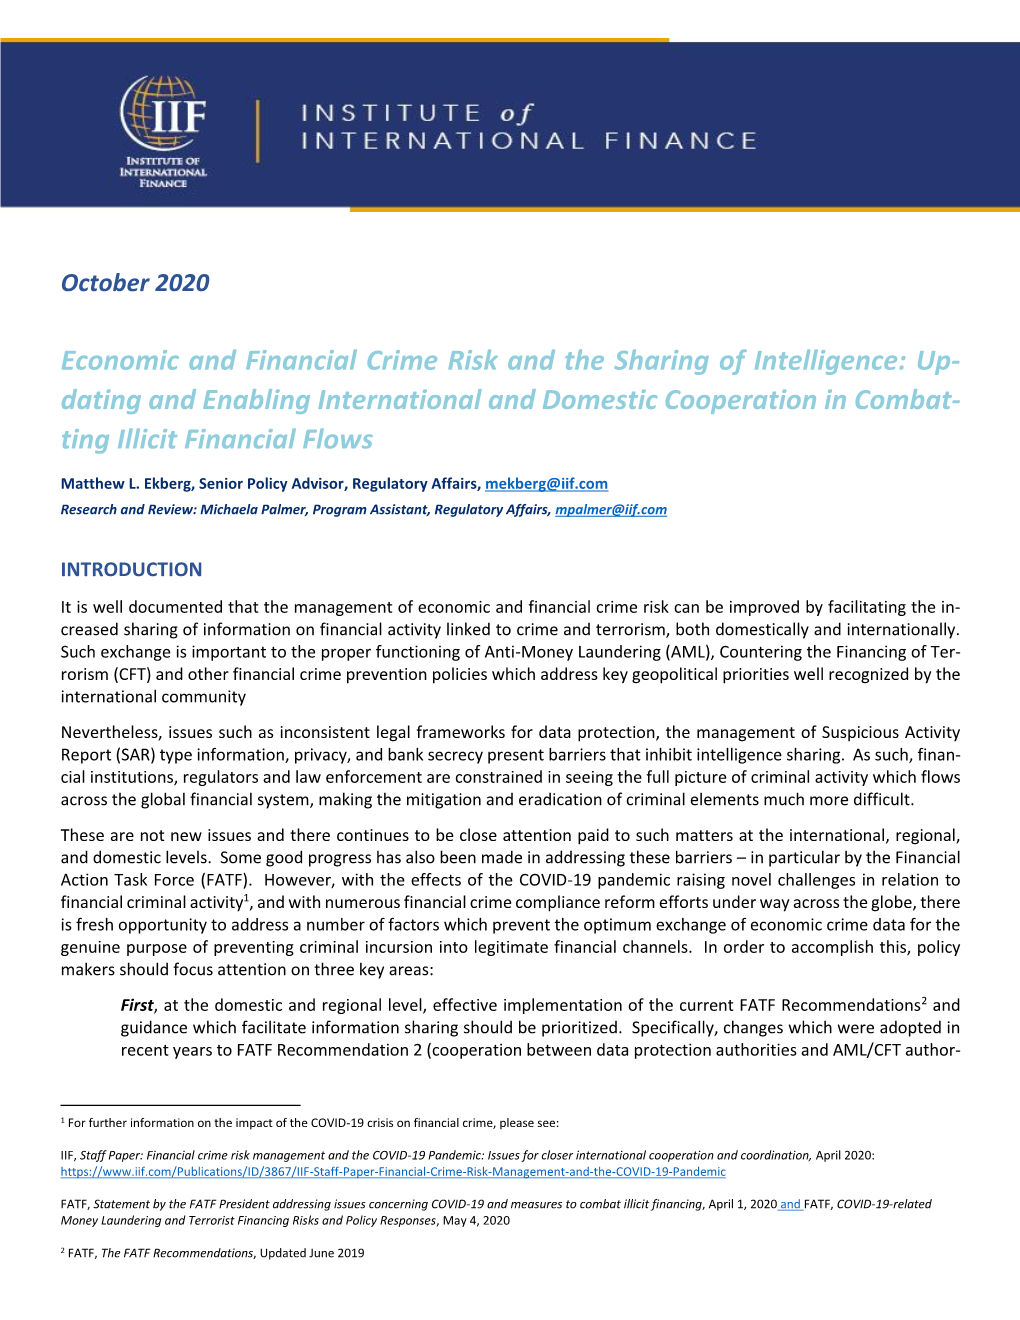 Economic and Financial Crime Risk and the Sharing of Intelligence